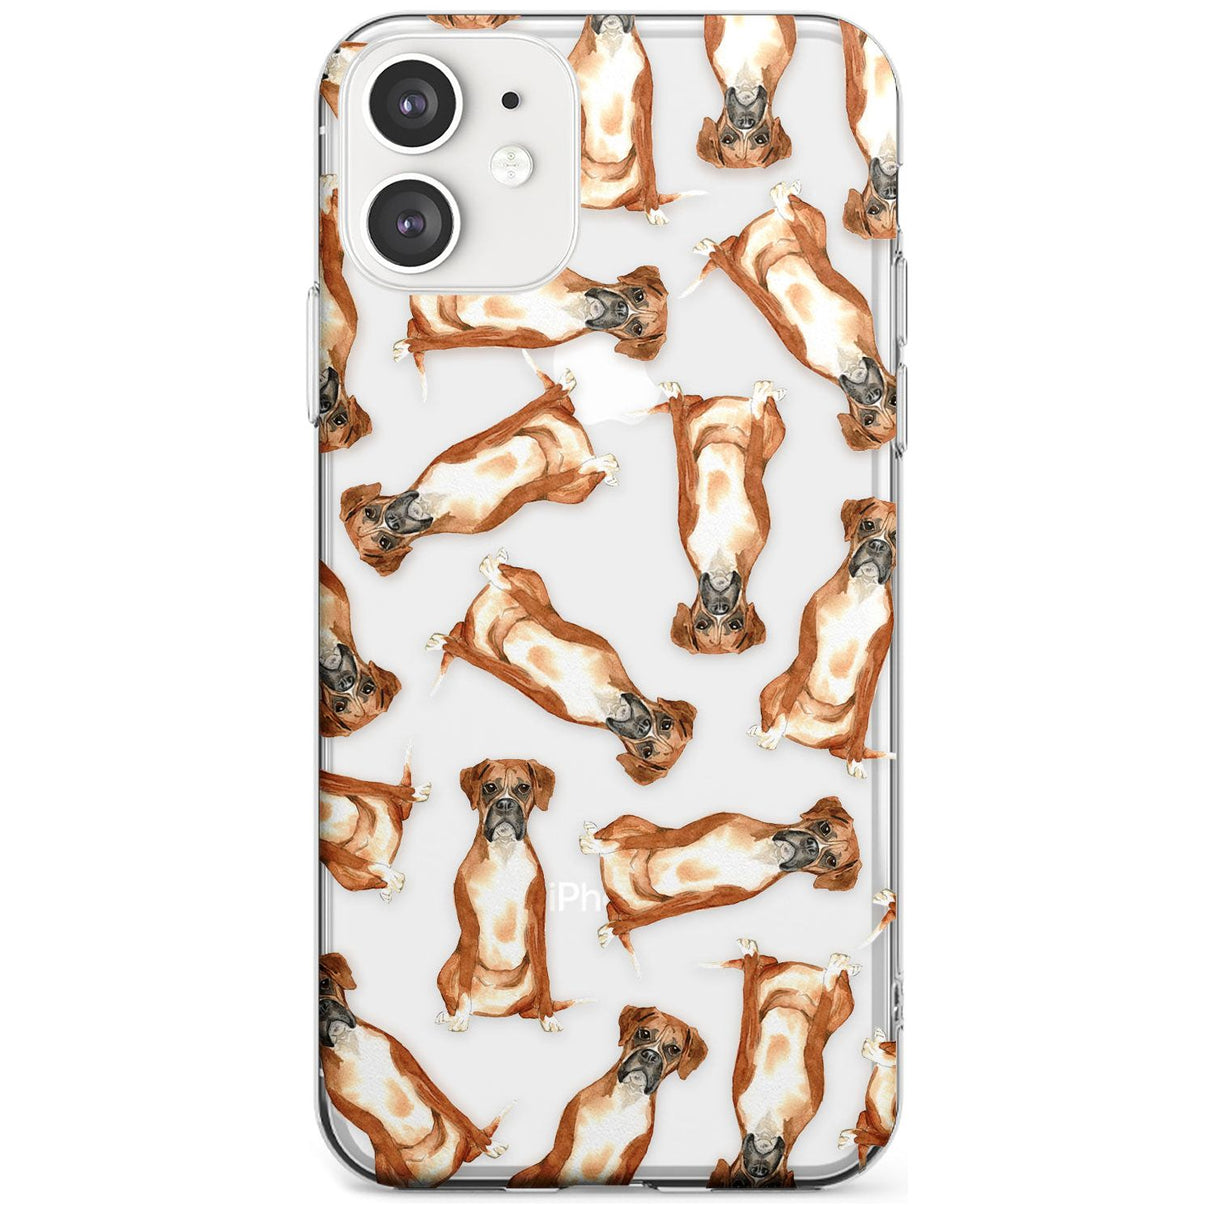 Boxer Watercolour Dog Pattern Slim TPU Phone Case for iPhone 11